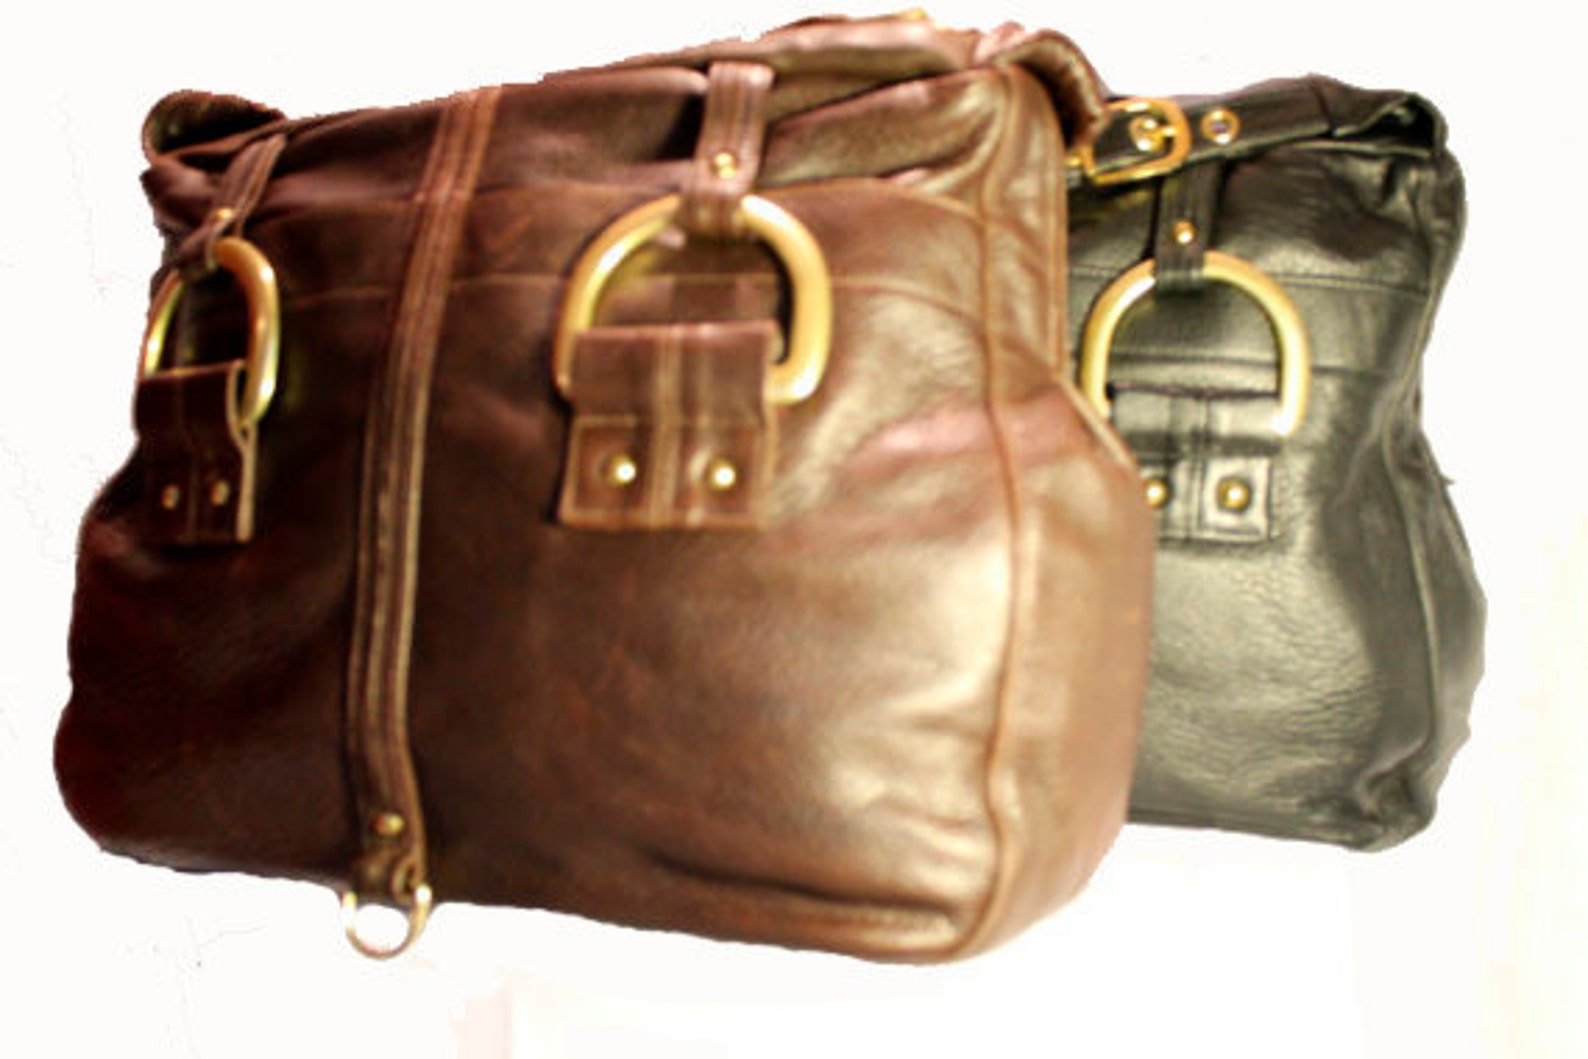 Chic Leather Satchel in Black or Chocolate Brown - Etsy